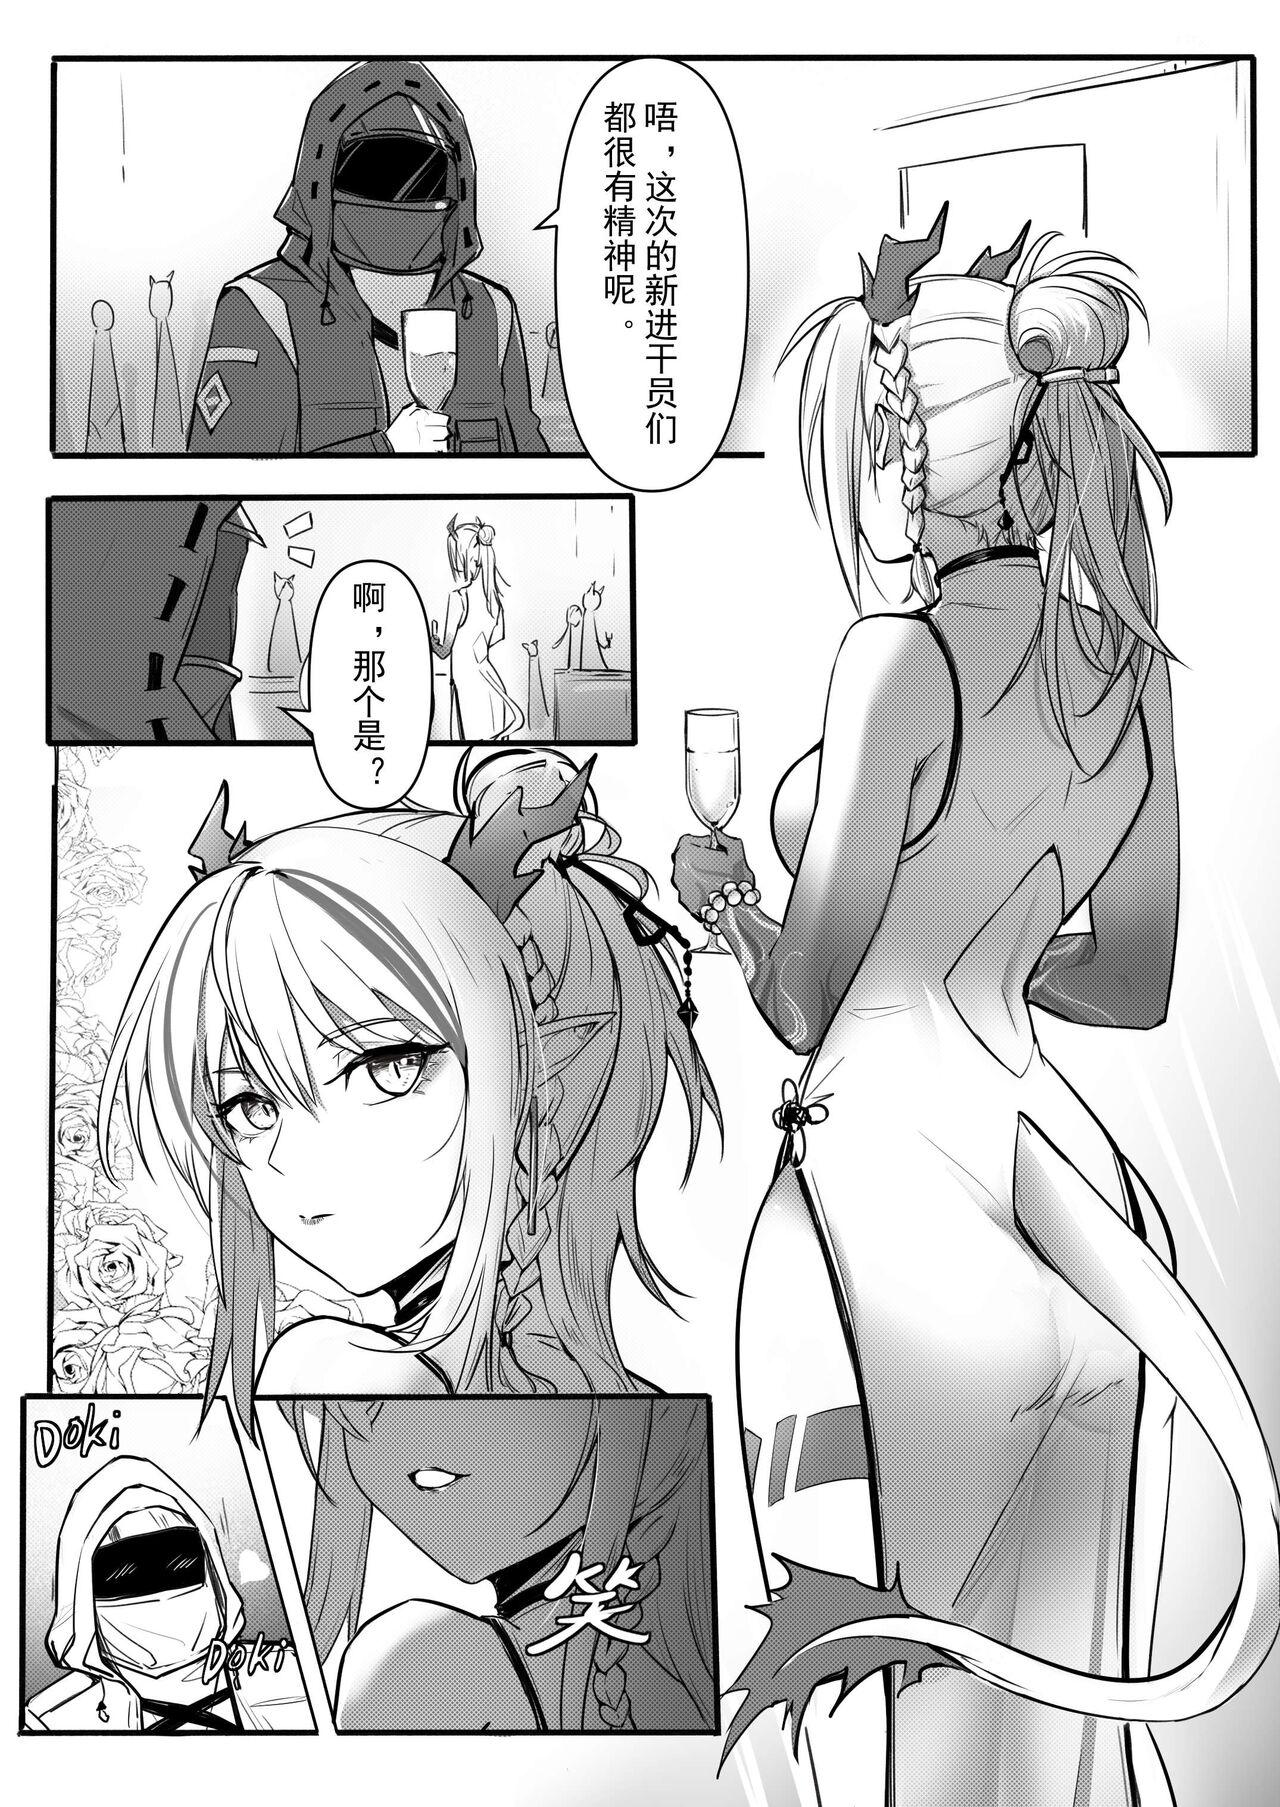 Naked Women Fucking 干员性爱秘闻录·年の欲情依存 - Arknights Girl On Girl - Page 4